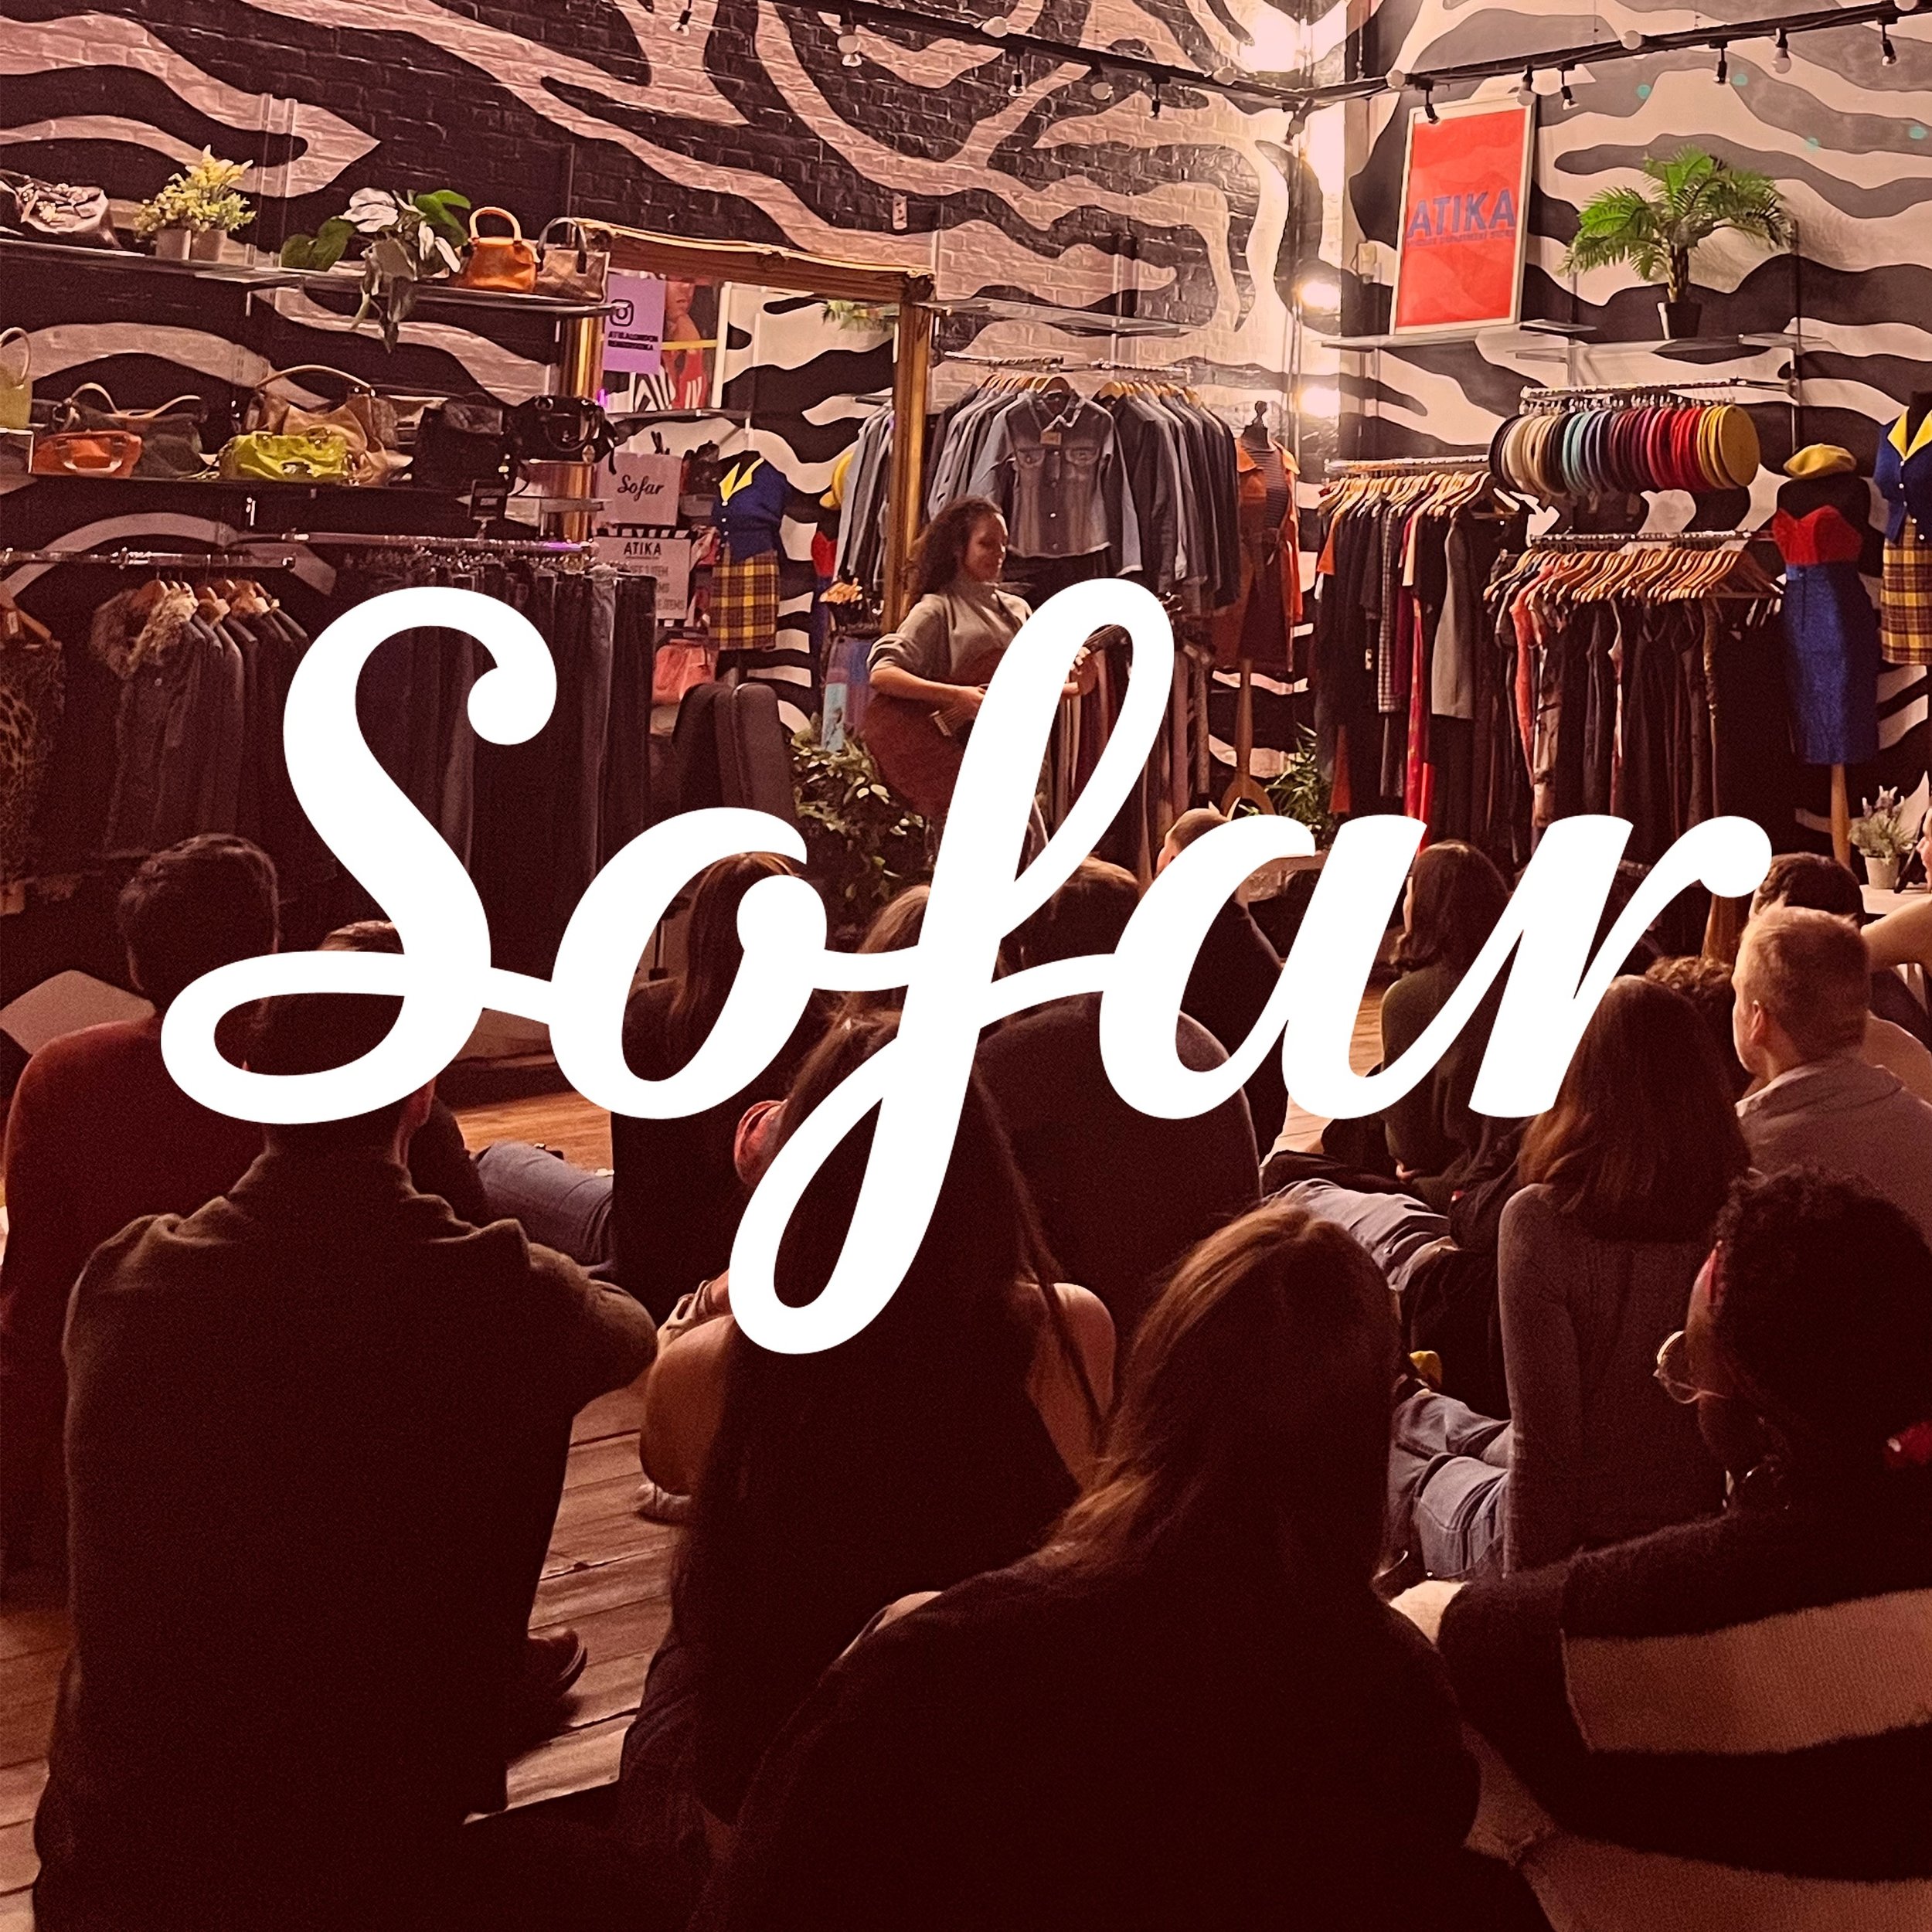 Time for some live music baby! @sofarlondon is back next Wednesday at ATIKA with some spoken word and folk gorgeousness. Grab yourself a ticket through the link in our bio 💥